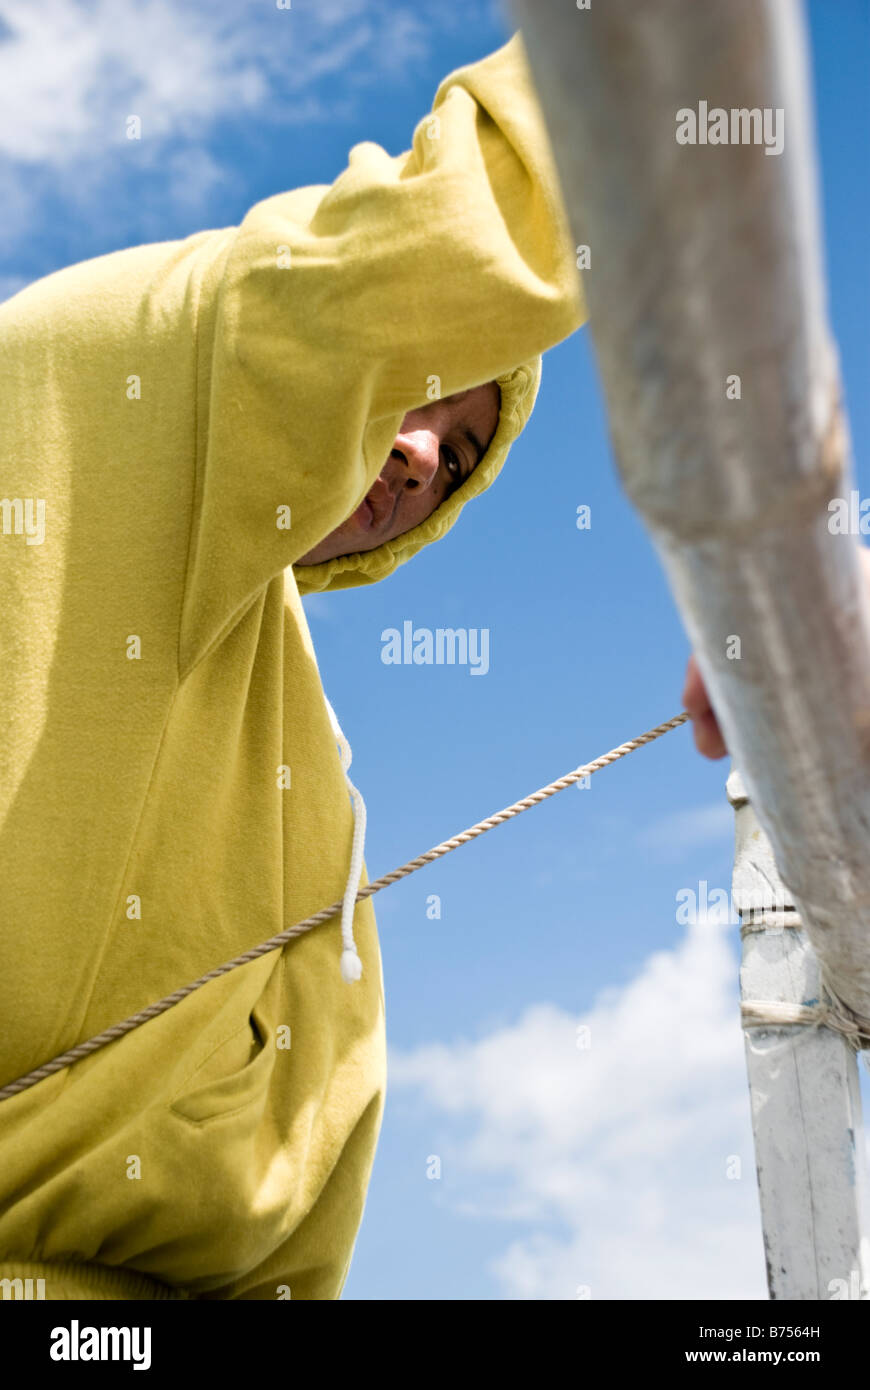 Filipino boatman looking down from his position by the mast Stock Photo